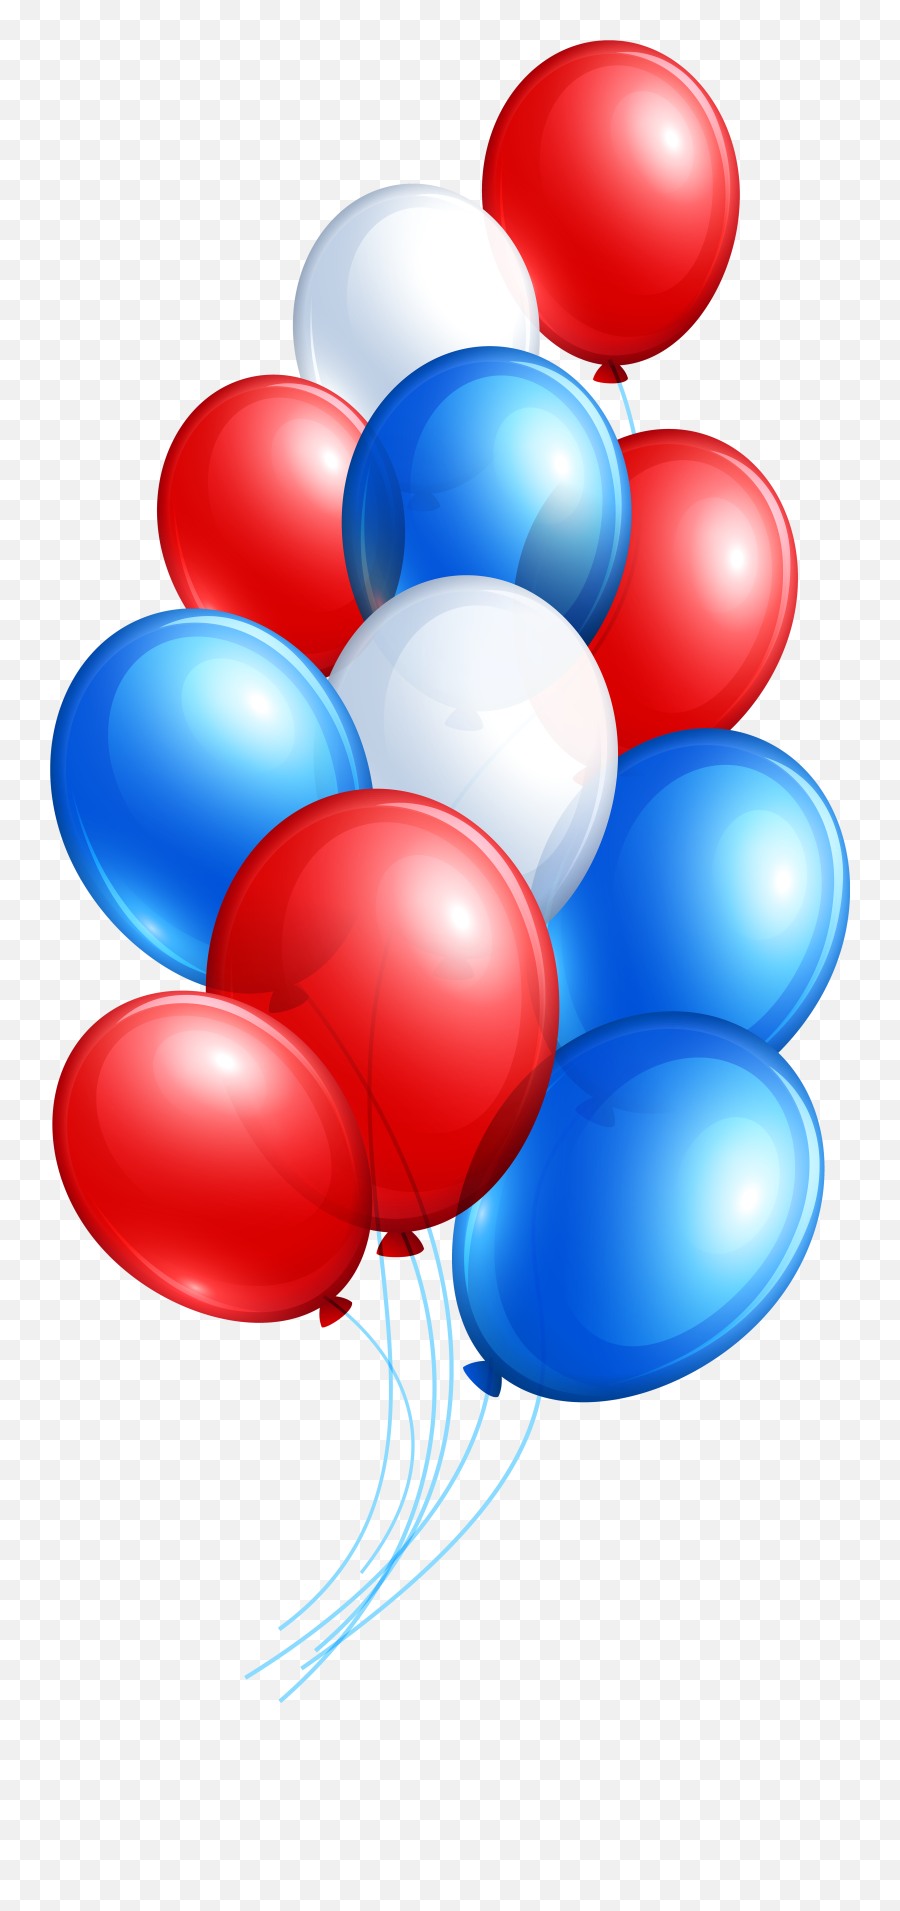 Red And Blue Balloons Transparent Background Clipart - Full Red And Blue Balloons Transparent Background Png,Balloons Transparent